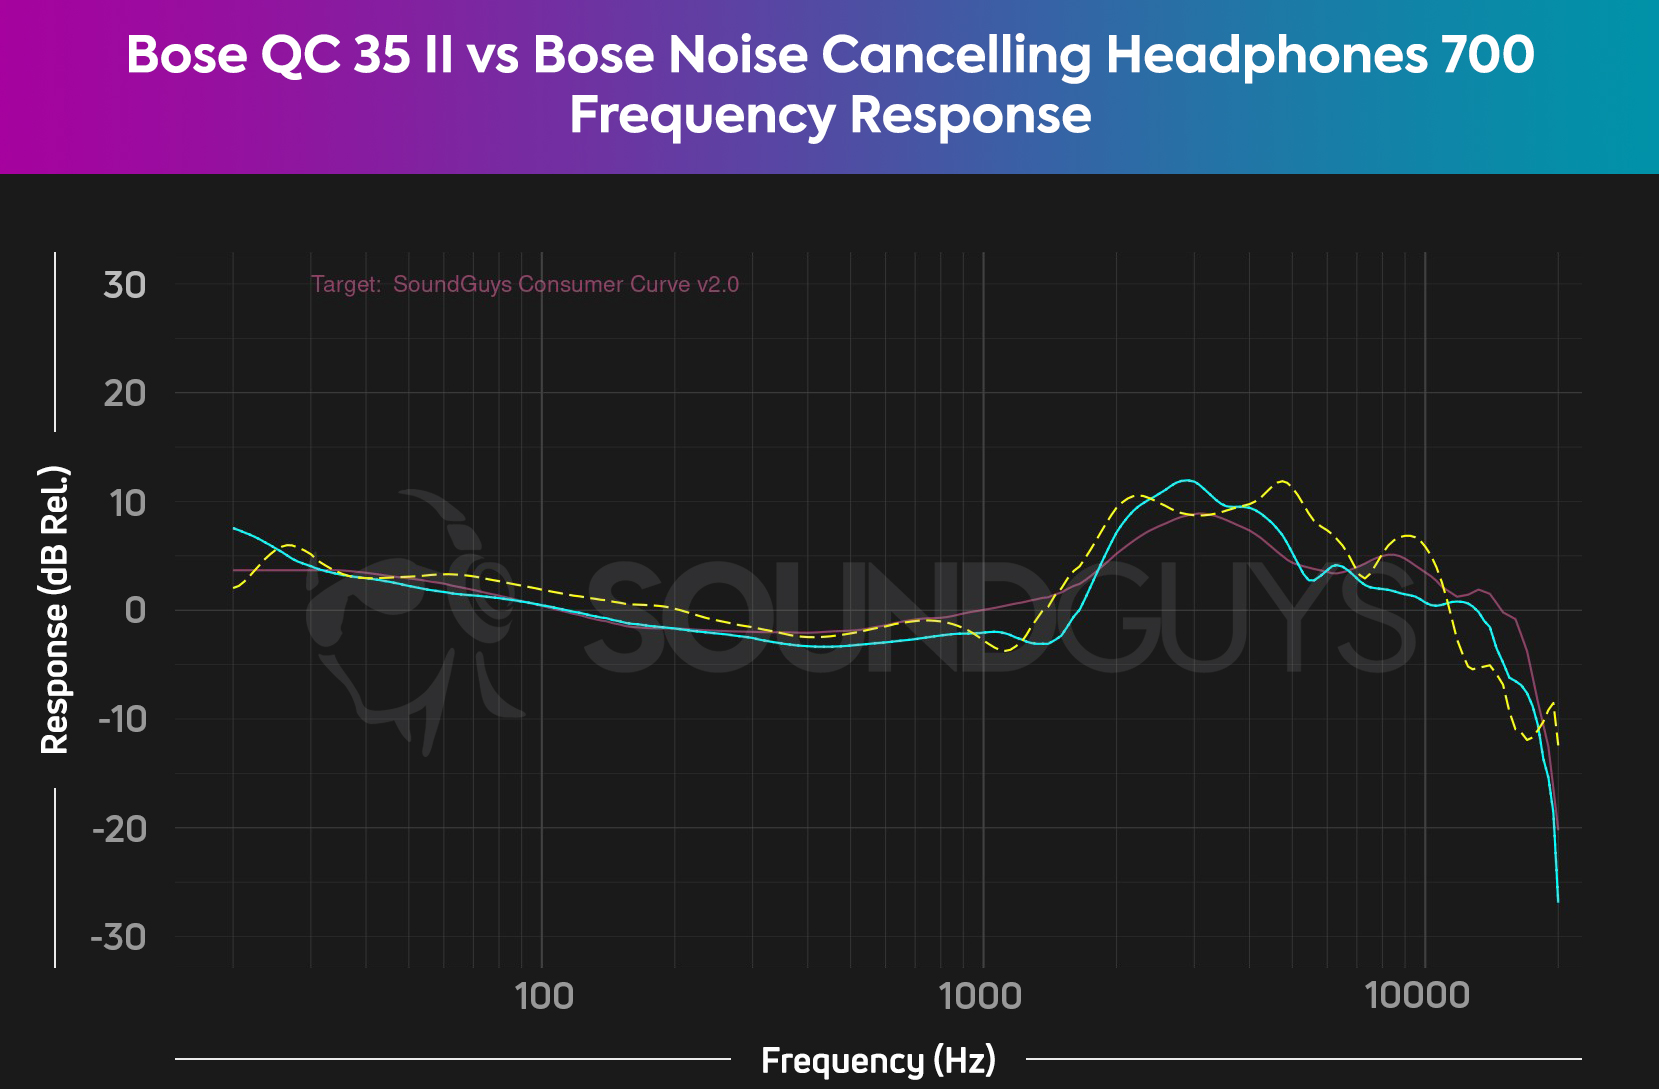 A chart depicts the Bose QuietComfort 35 II (cyan) and Bose Noise Canceling Headphones 700 (yellow dash) frequency response to the SoundGuys Consumer Curve V2.0 (pink).